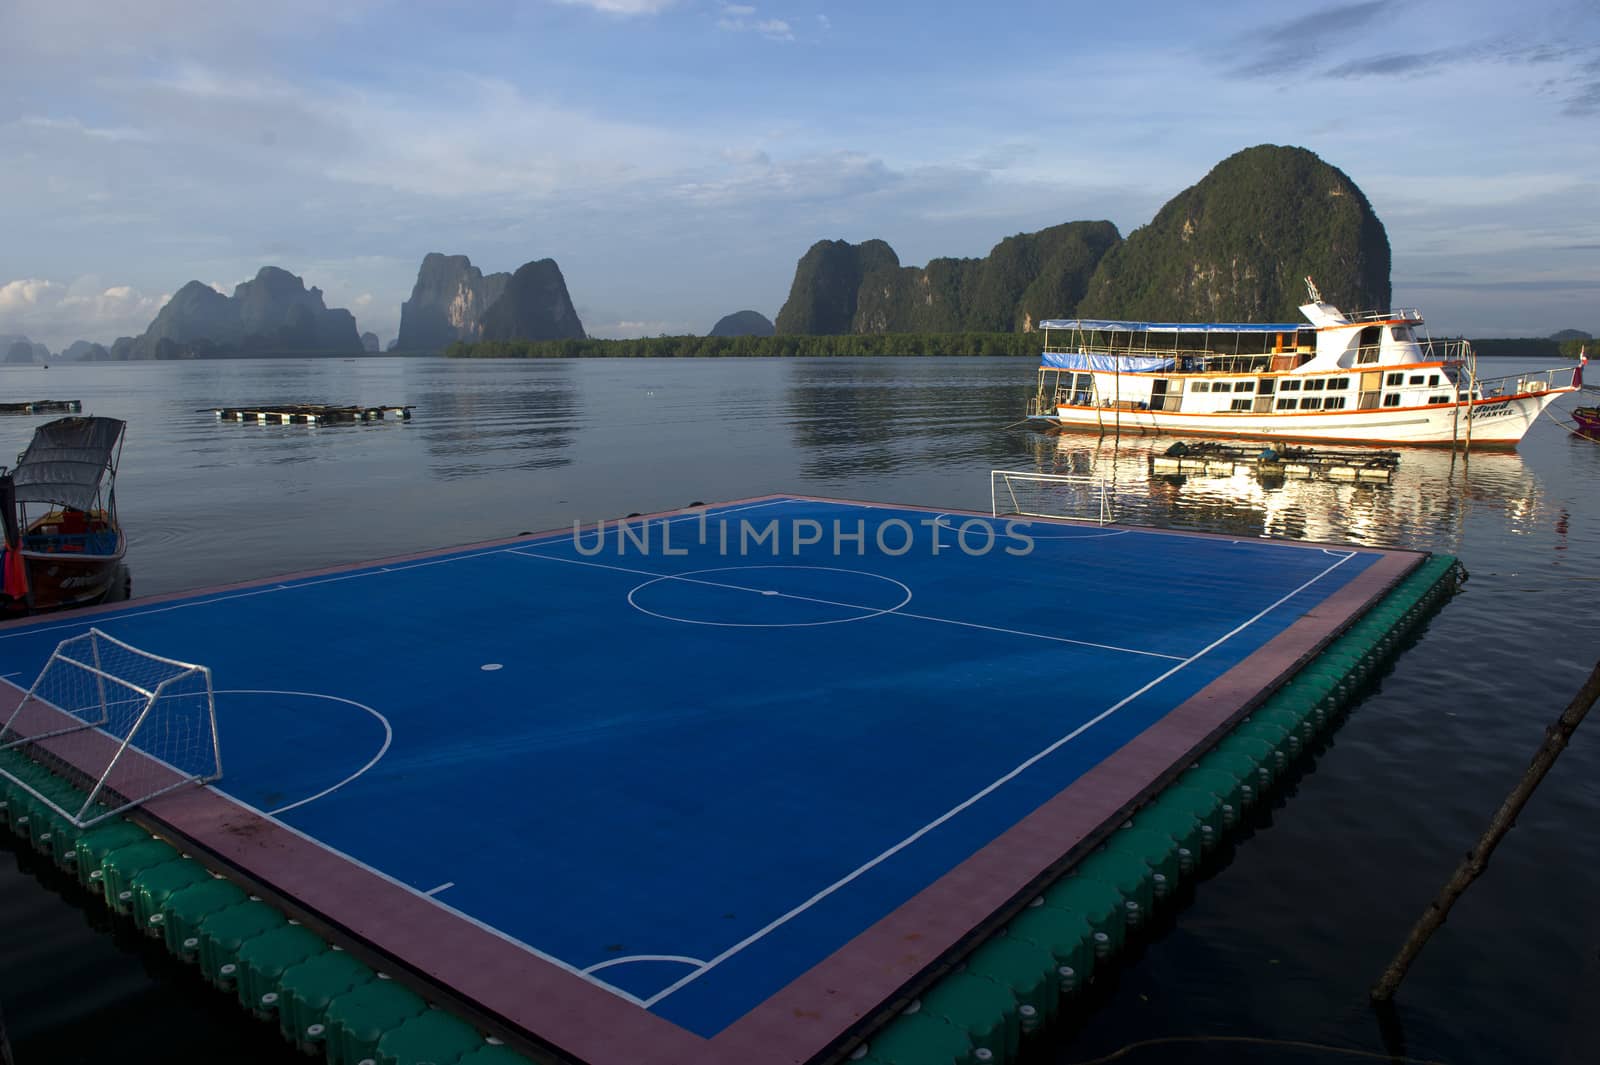 view of soccor court on the sea in Thailand by think4photop